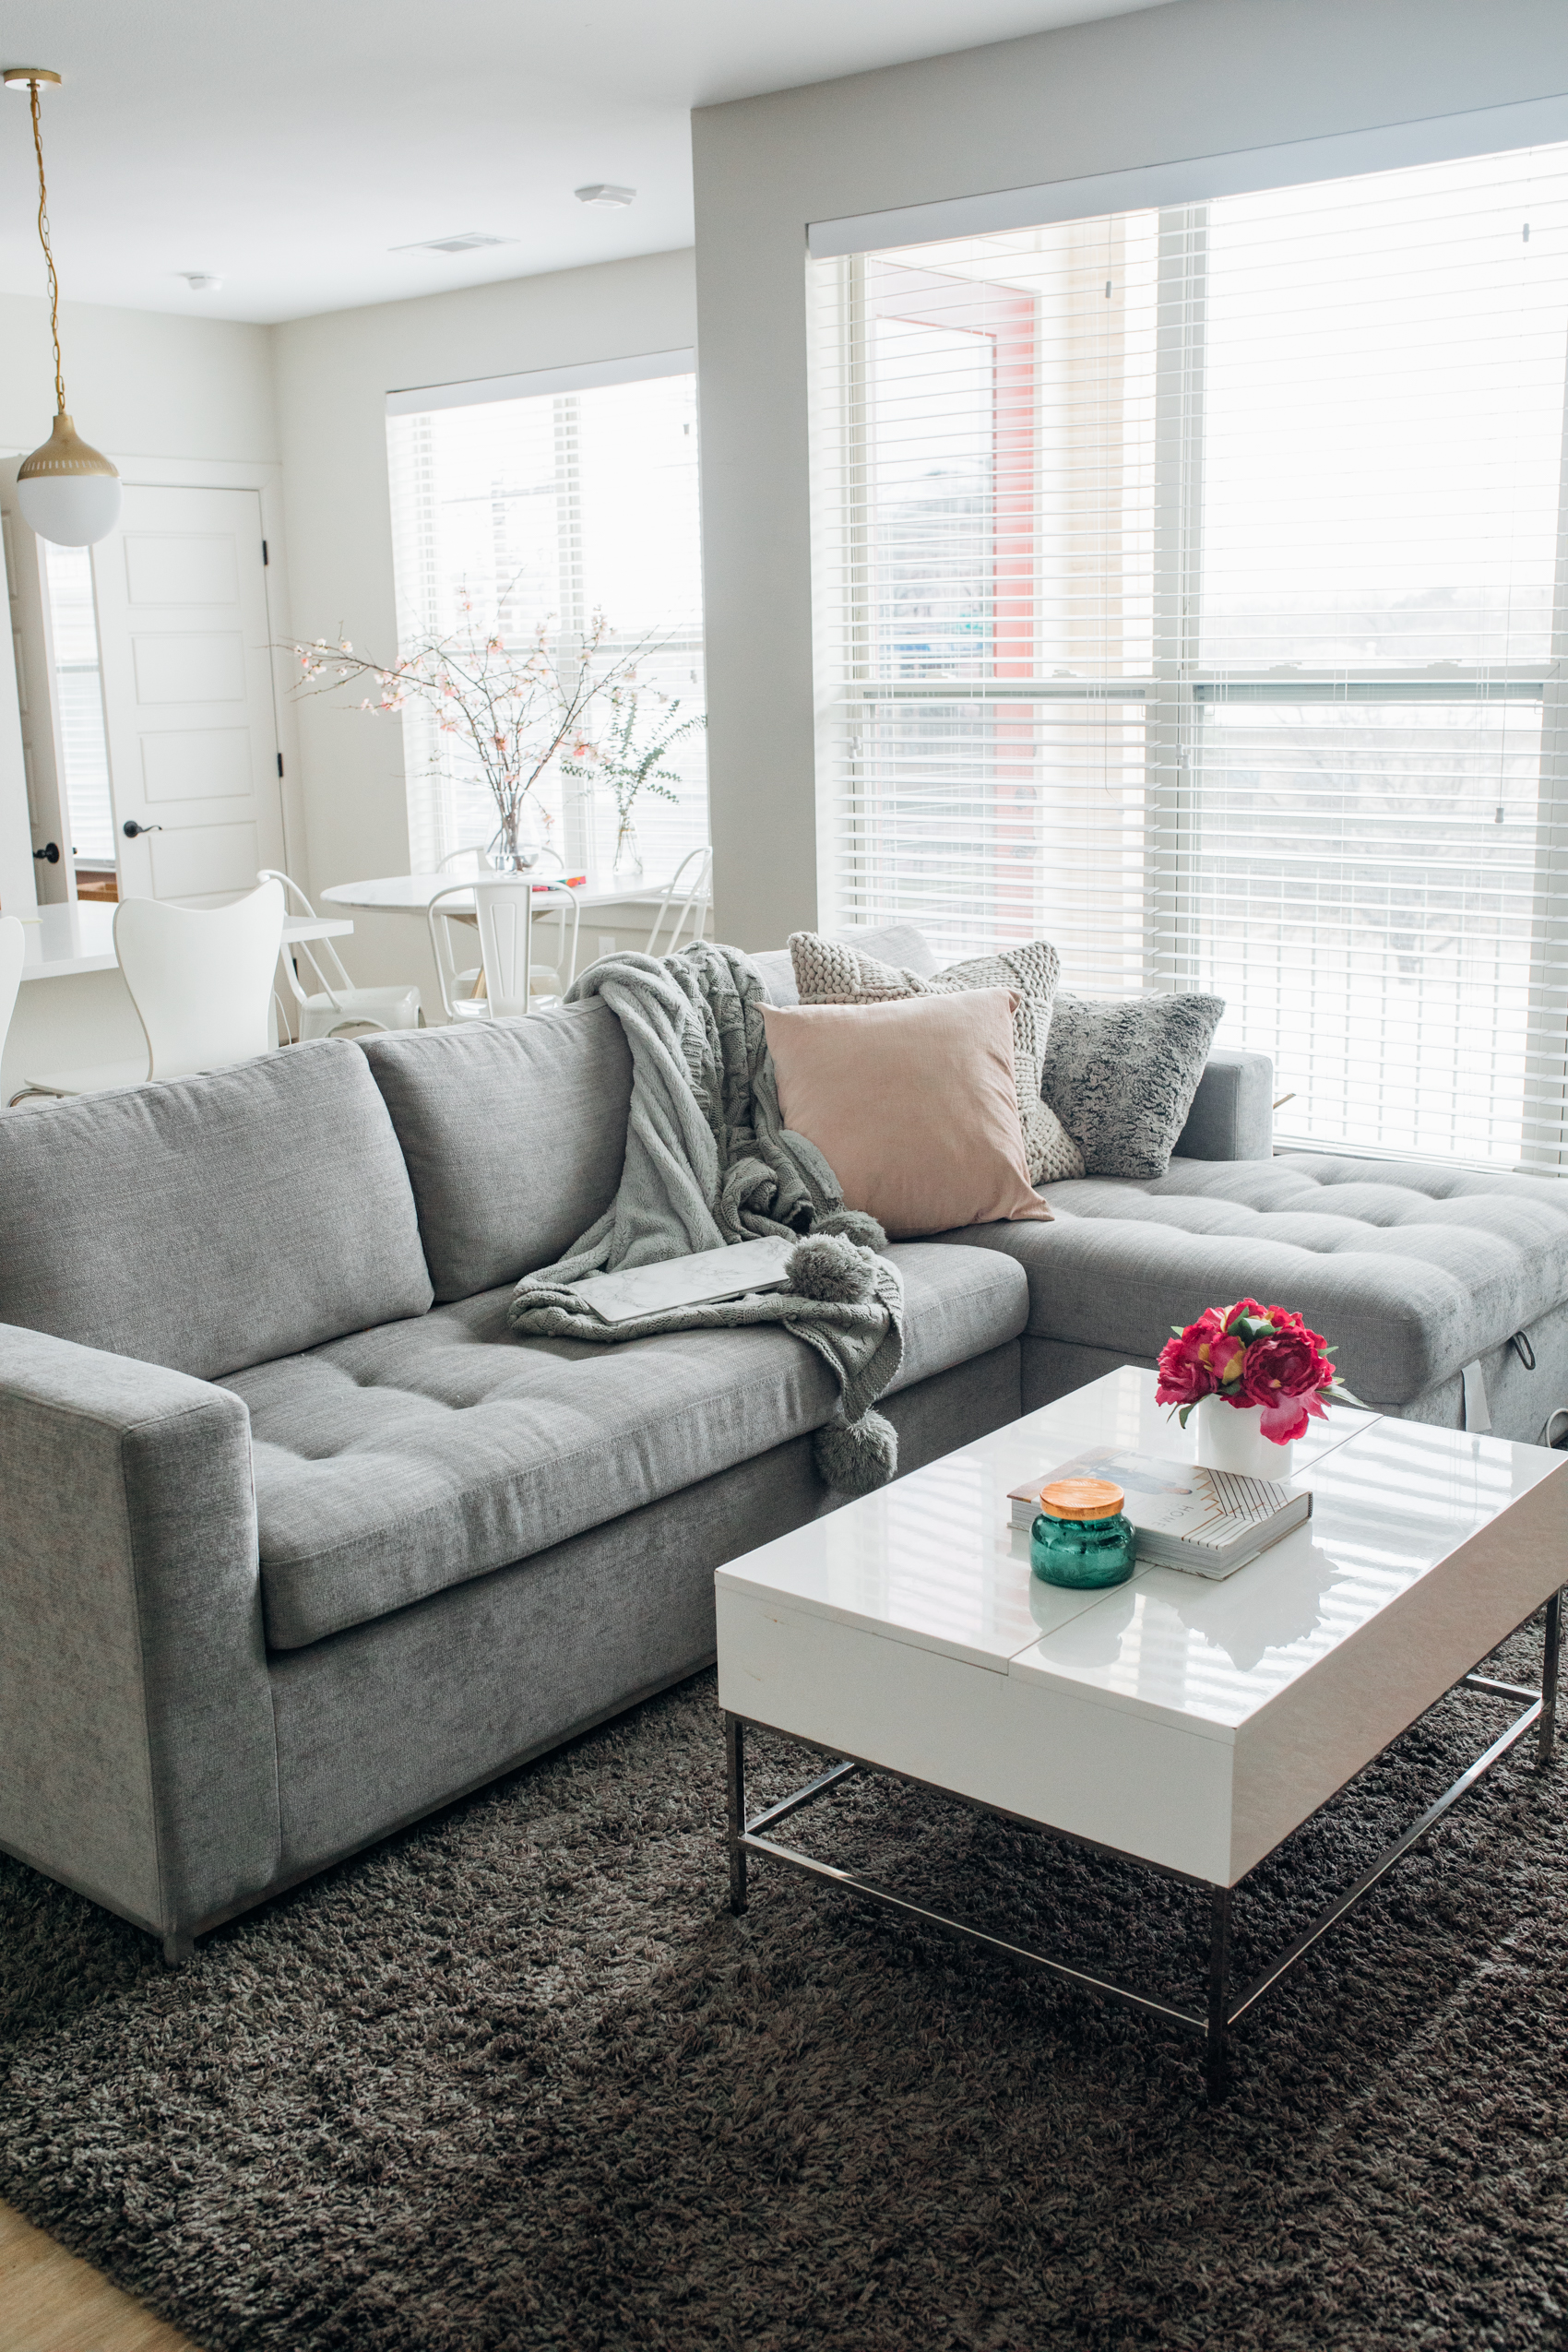 Blogger Hoang-Kim shares her living room decor and organization